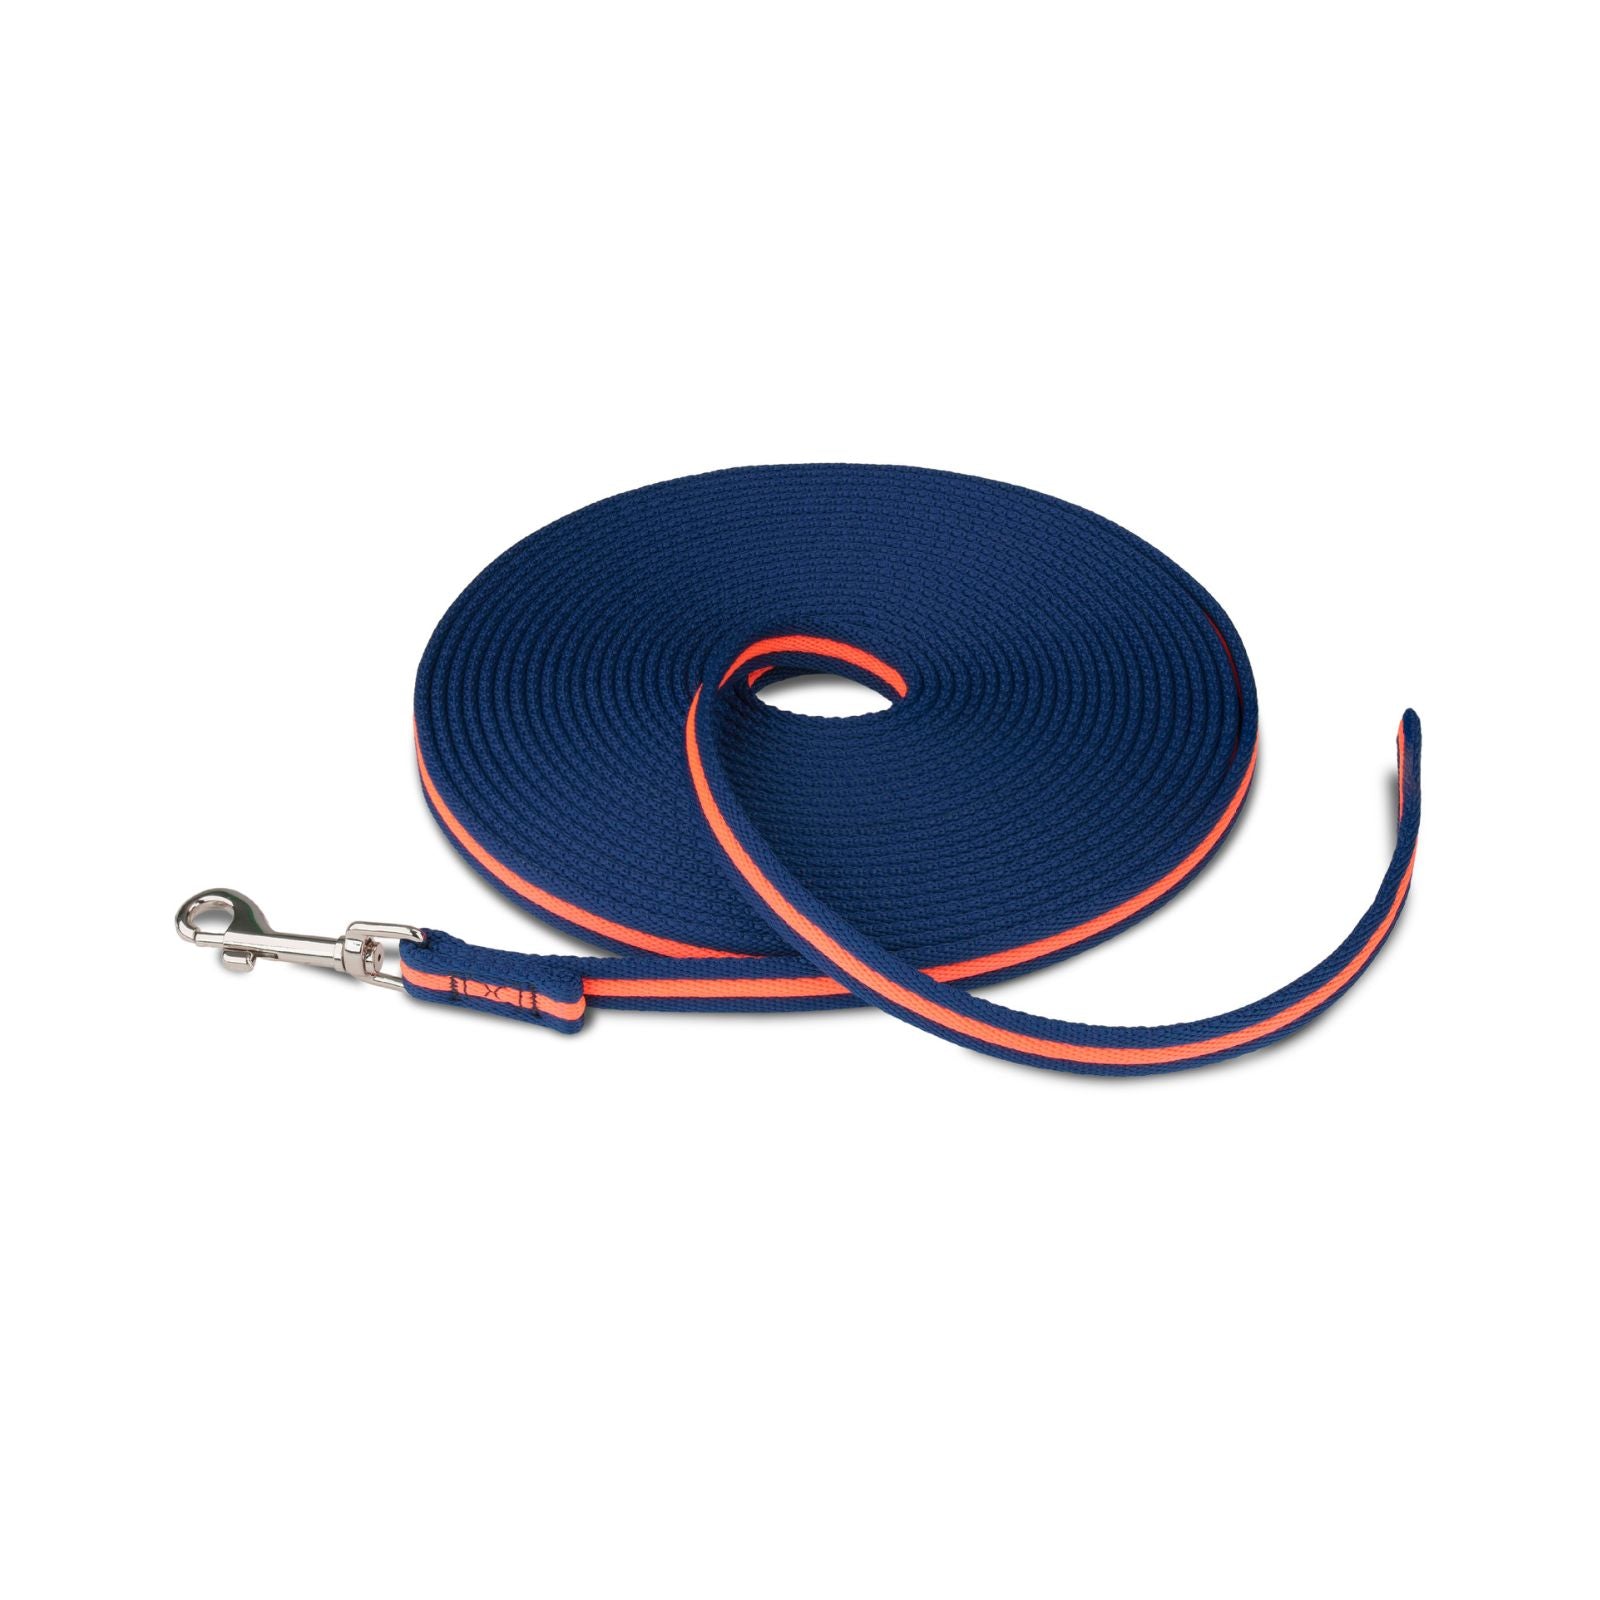 Navy and coral 10m recall dog coaching leash with stainless steel clip.